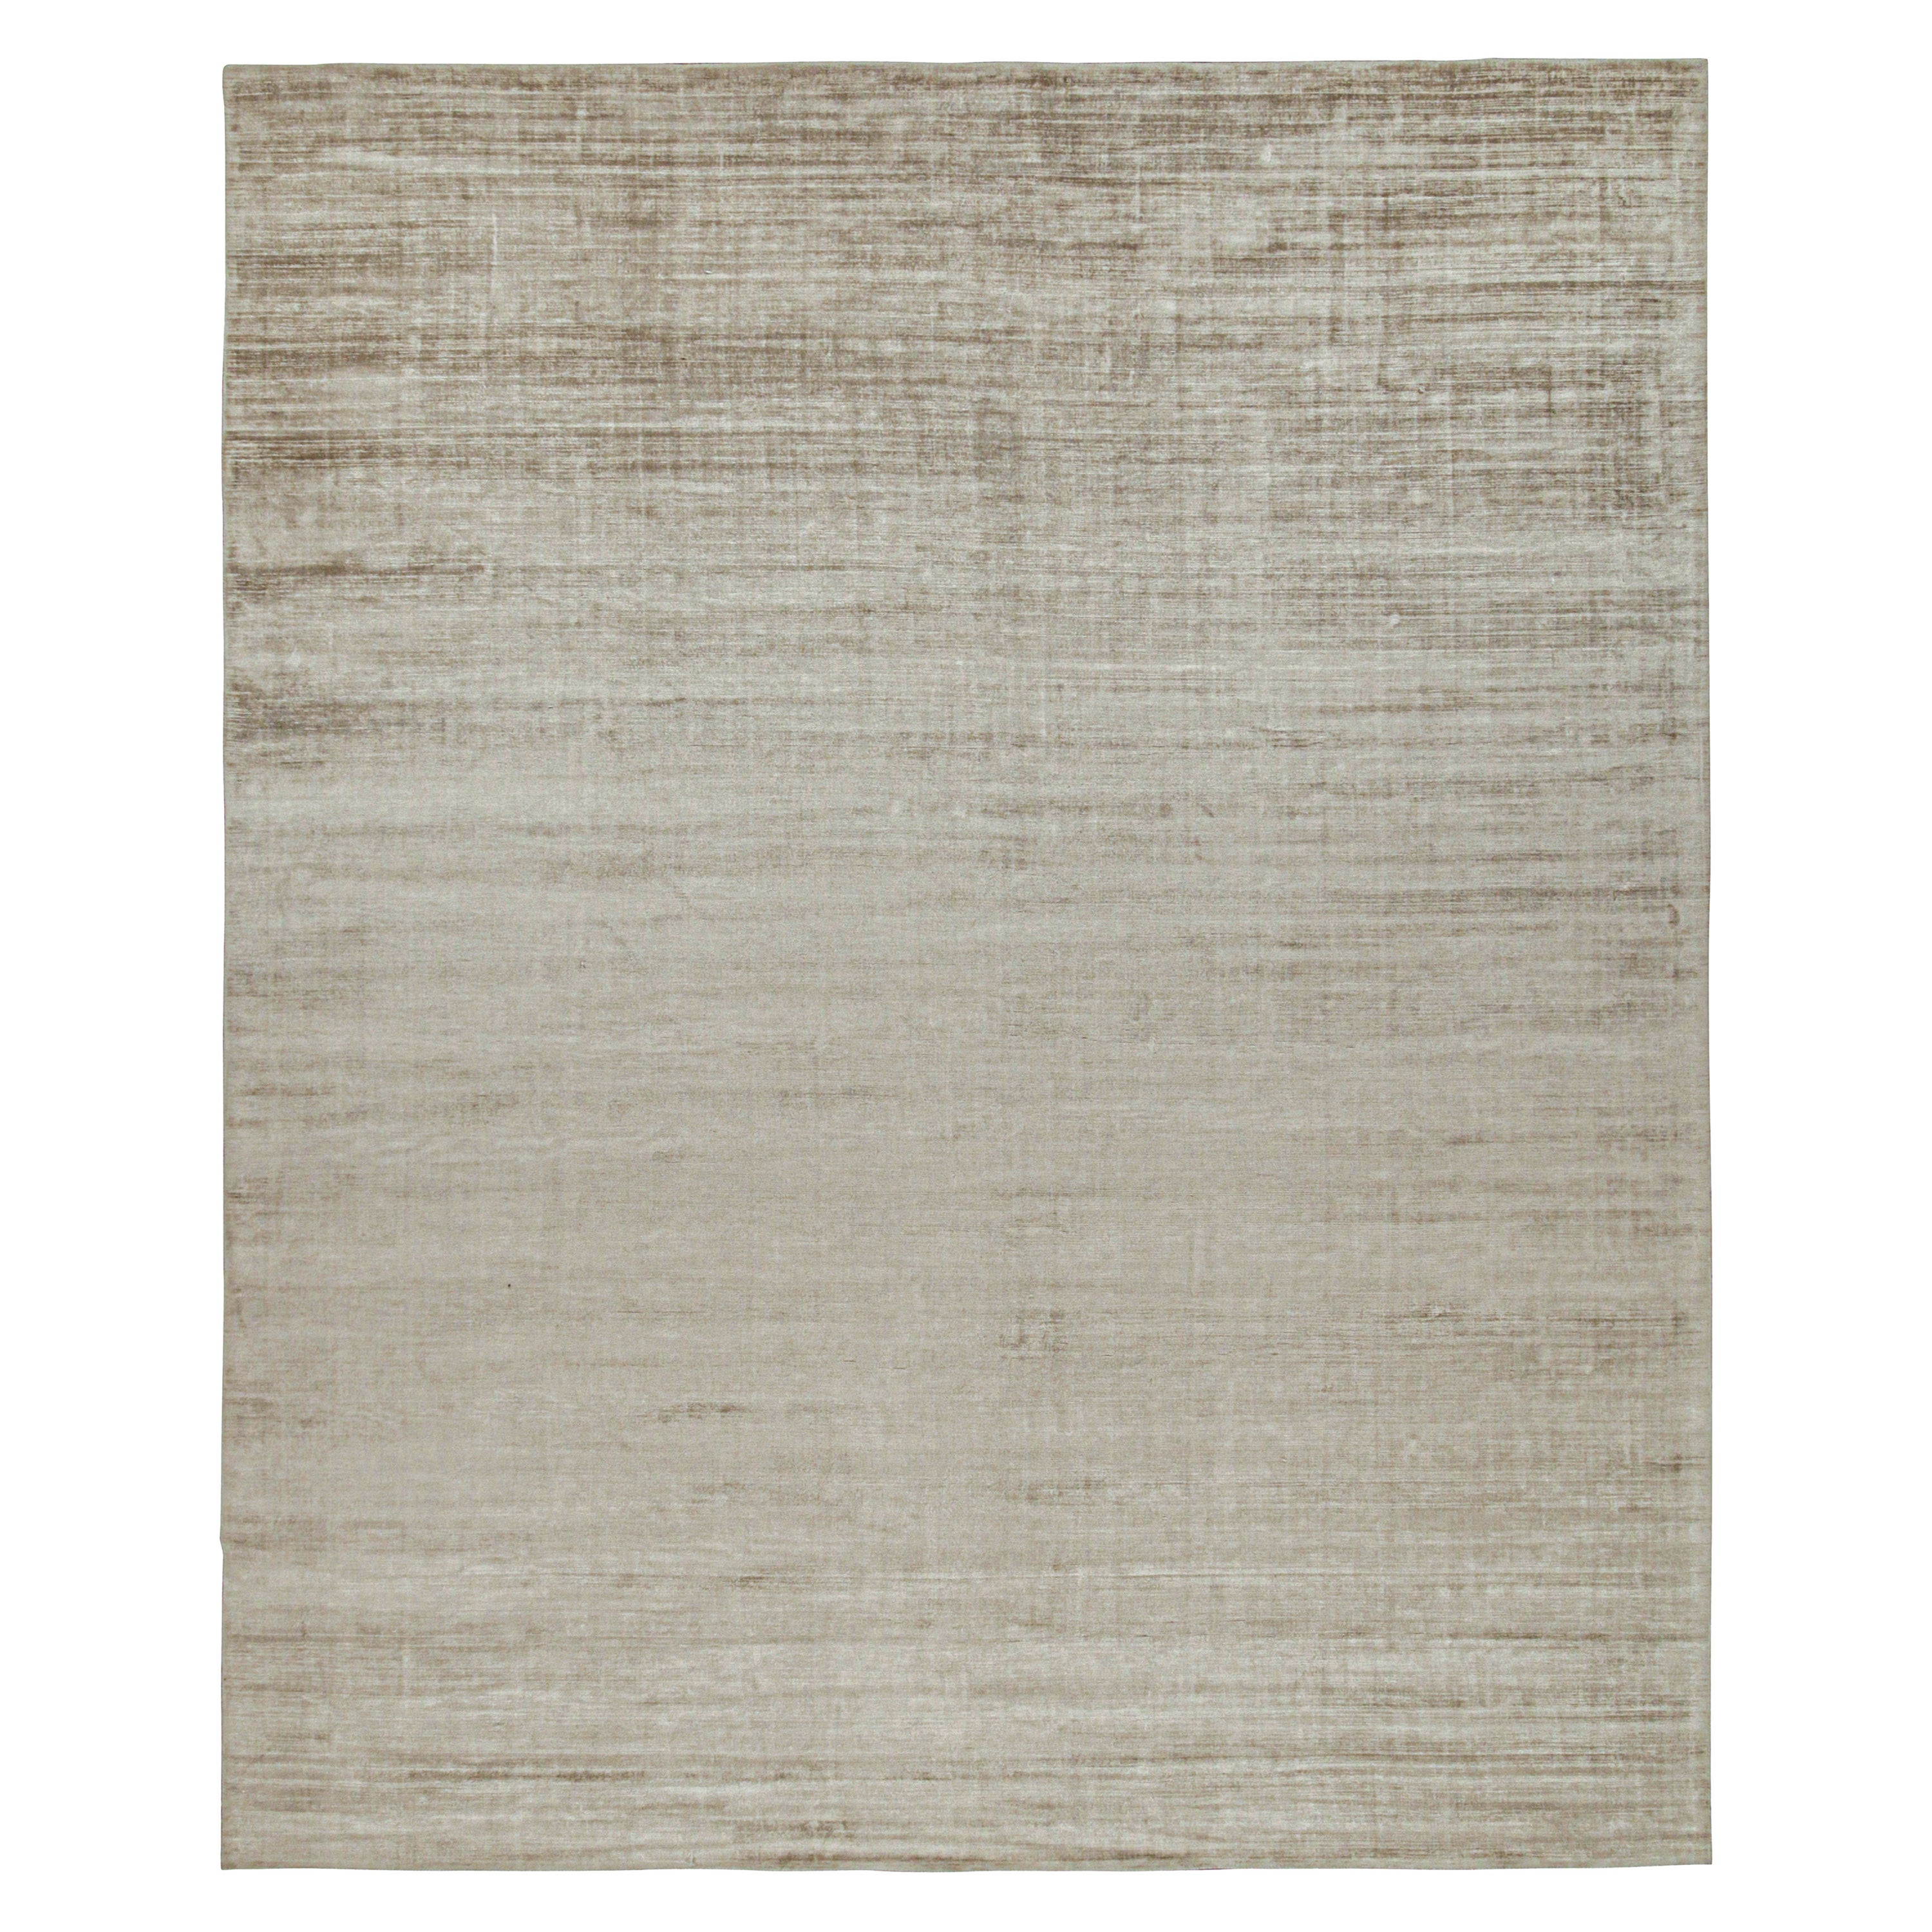 This contemporary 12x15 rug is a grand new entry to Rug & Kilim’s Texture of Color Collection. Hand-knotted in art silk and cotton. 

Connoisseurs will note this piece is from our new Light on Loom line, which includes quicker custom capabilities